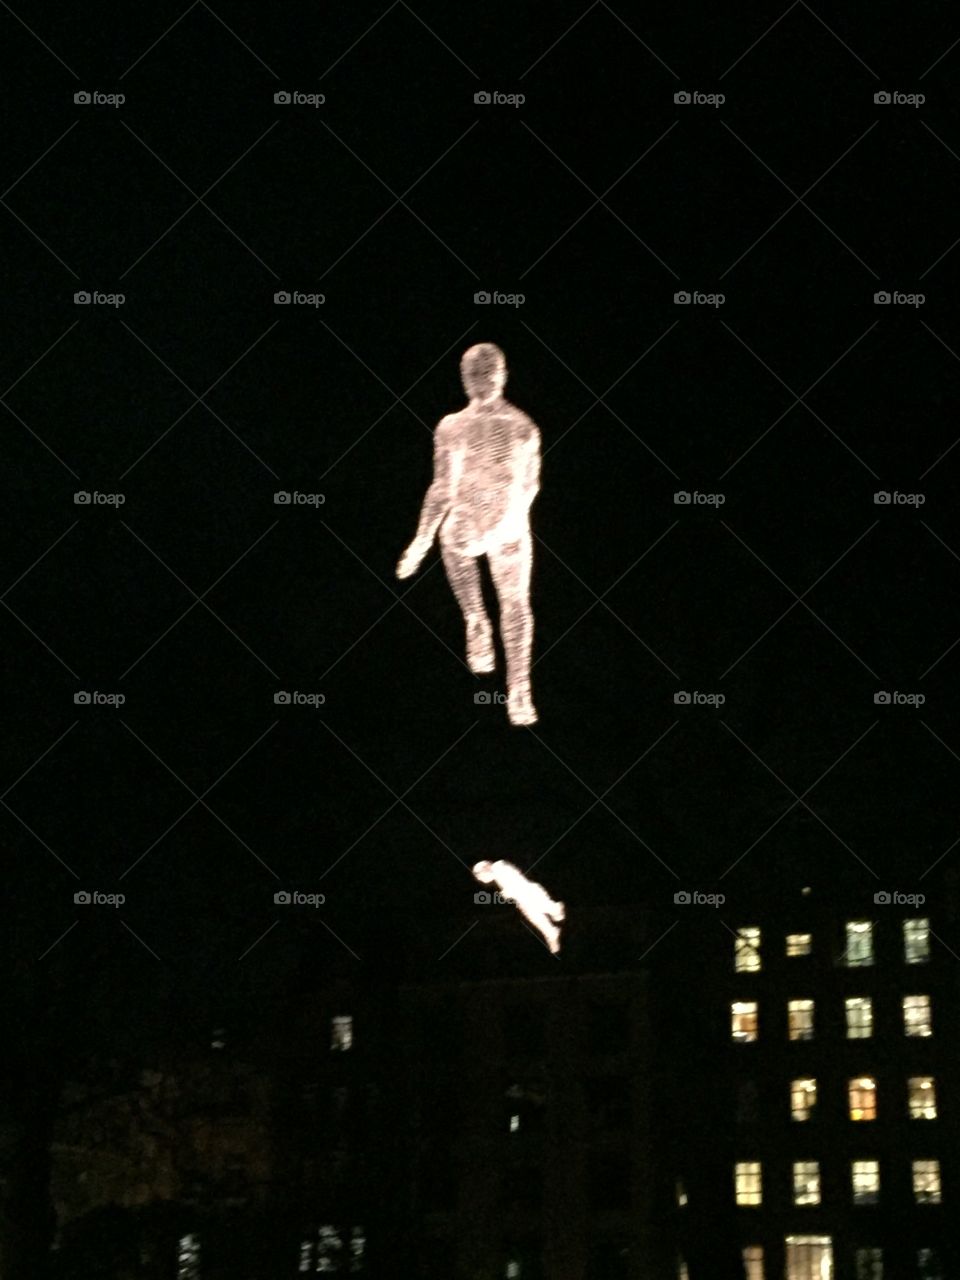 Flying figures in the lumiere display, London 